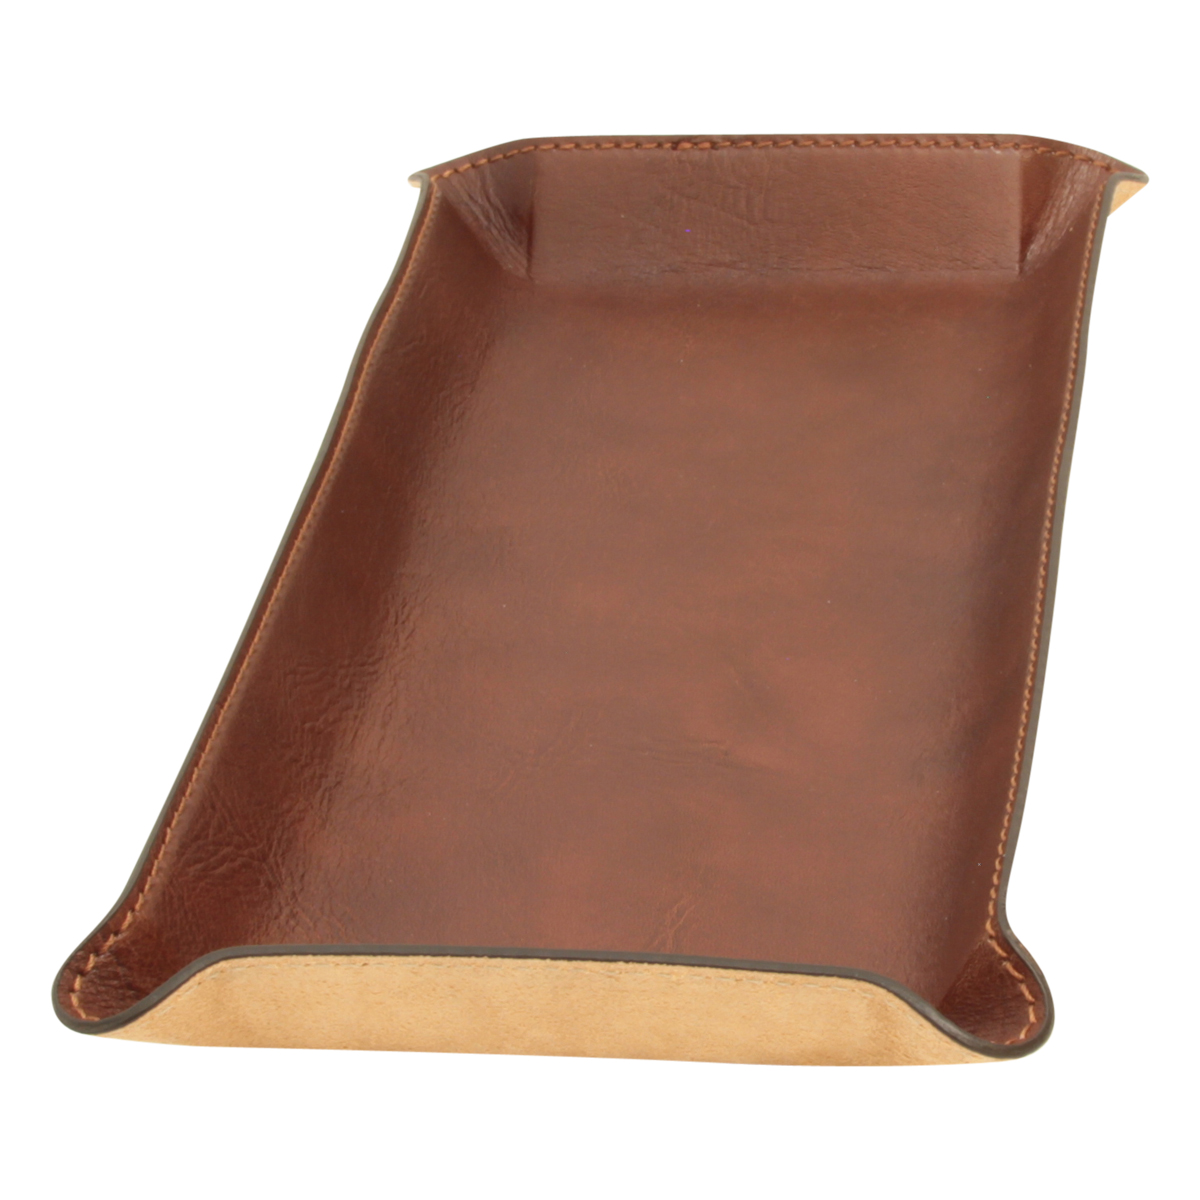 Leather Desk Tray - Brown | 762089MA UK | Old Angler Firenze